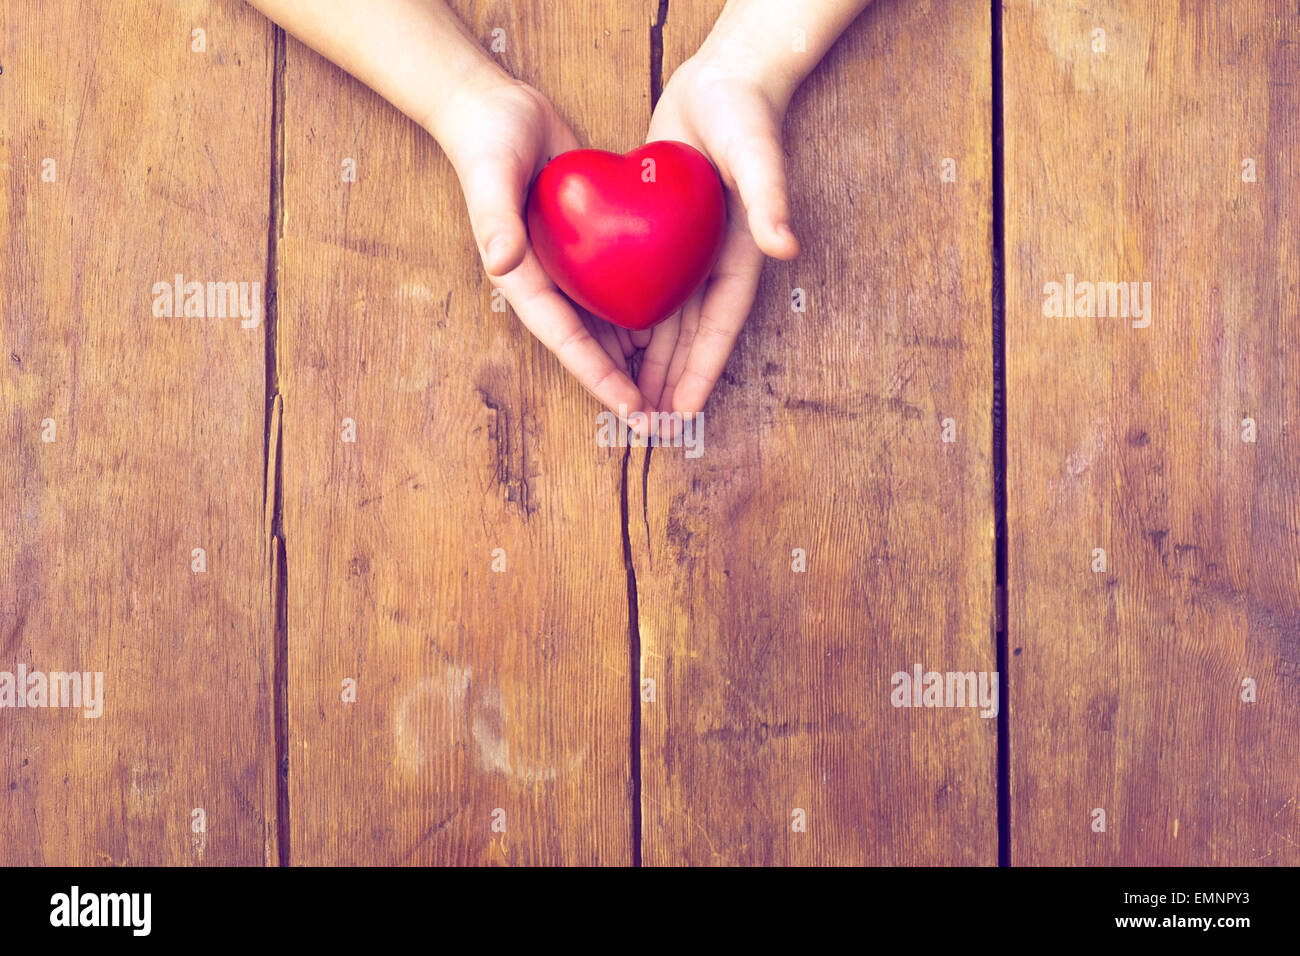 red heart in hands over vintage wooden background Stock Photo